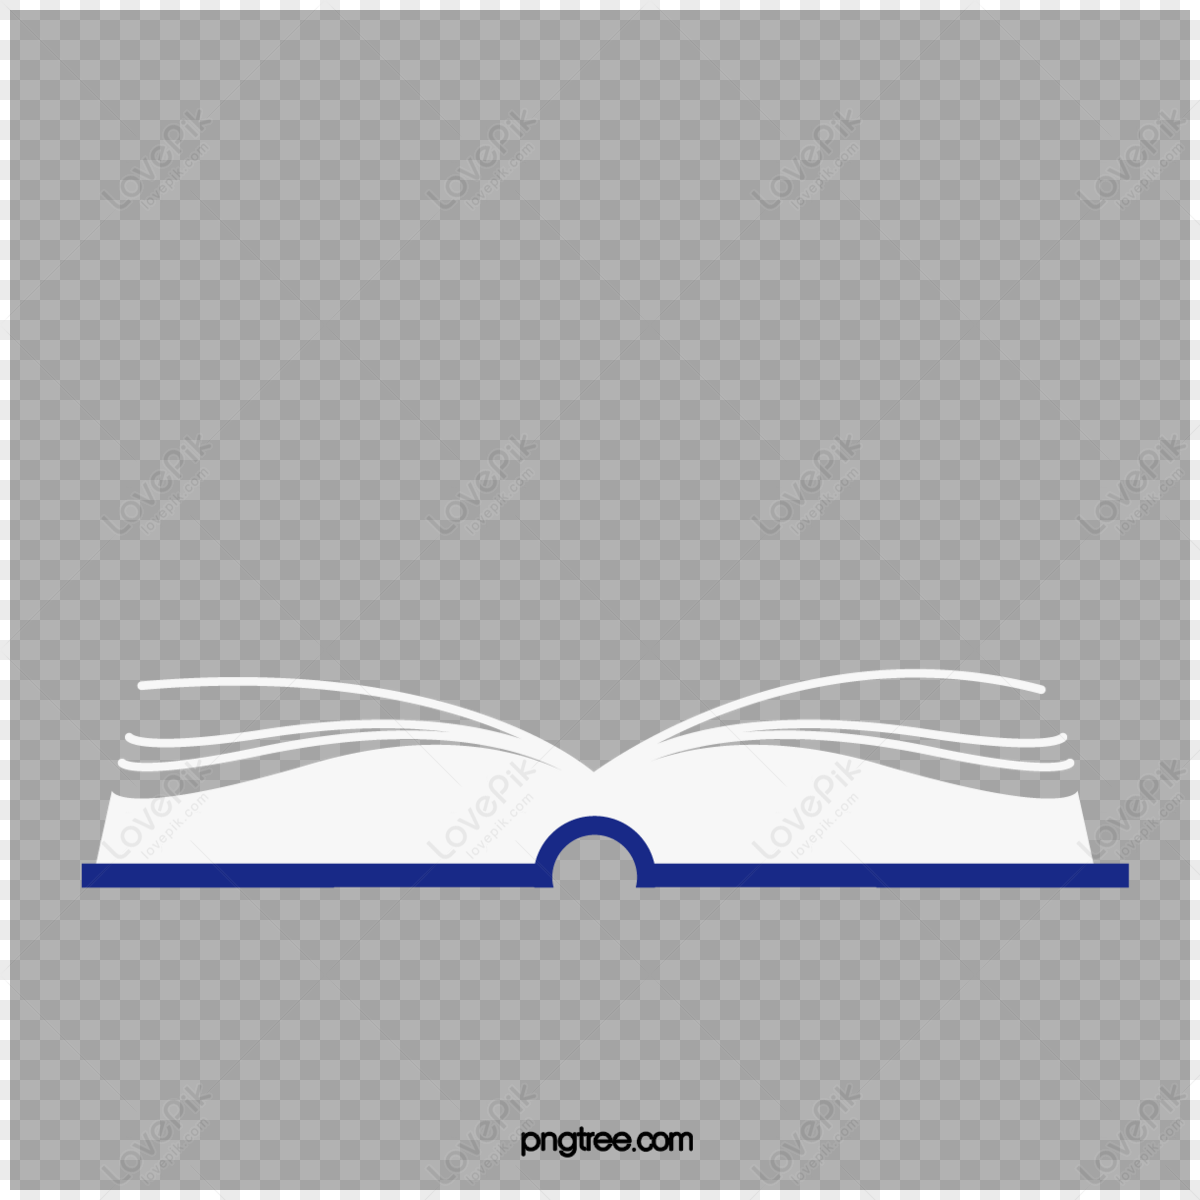 Book books cartoon stationery,office stationery,office supplies,color stationery png image free download